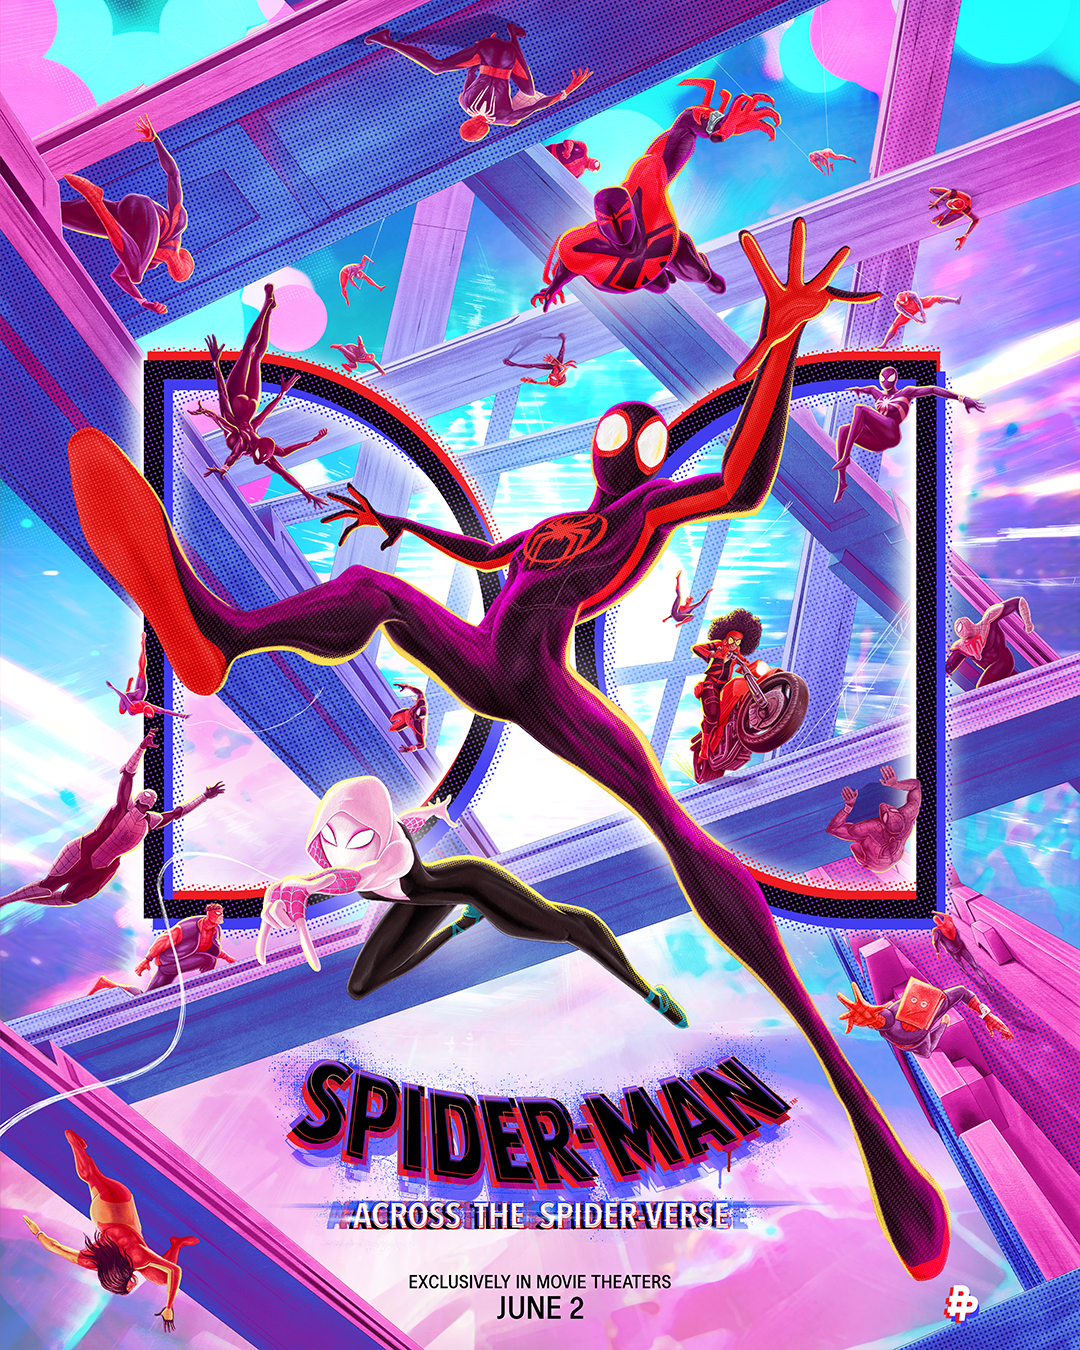 Official Sony Pictures - Spider-Man: Into the Spider-Verse